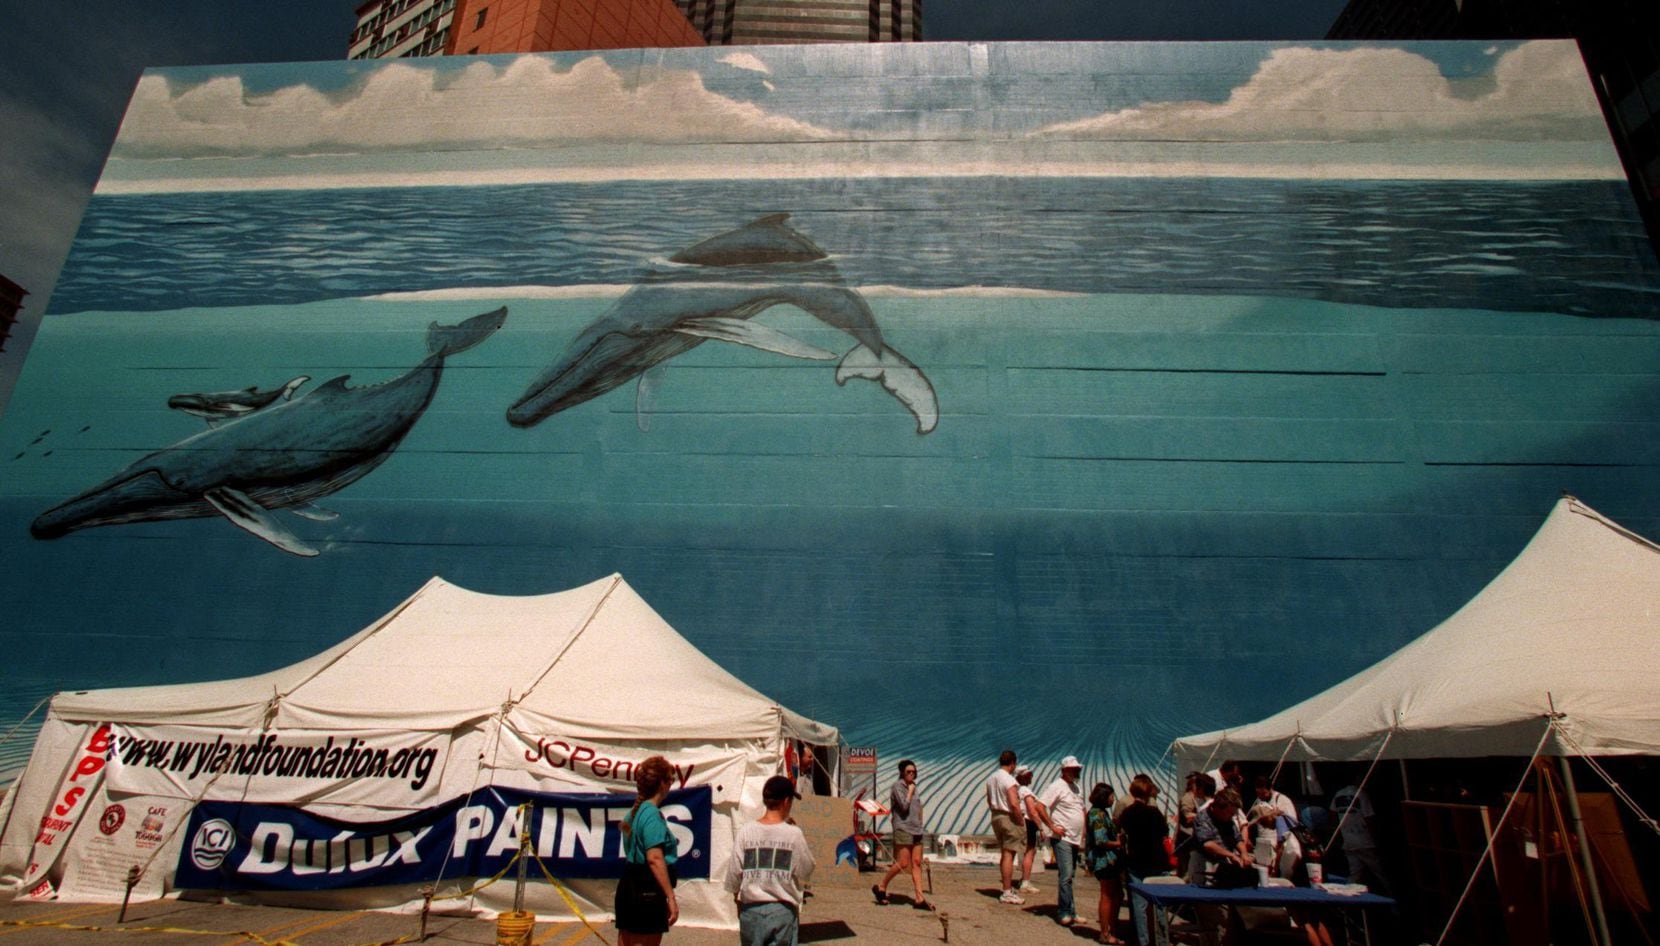 Part of the international "Whaling Wall" series, painted in Dallas by Wyland the artist, on...